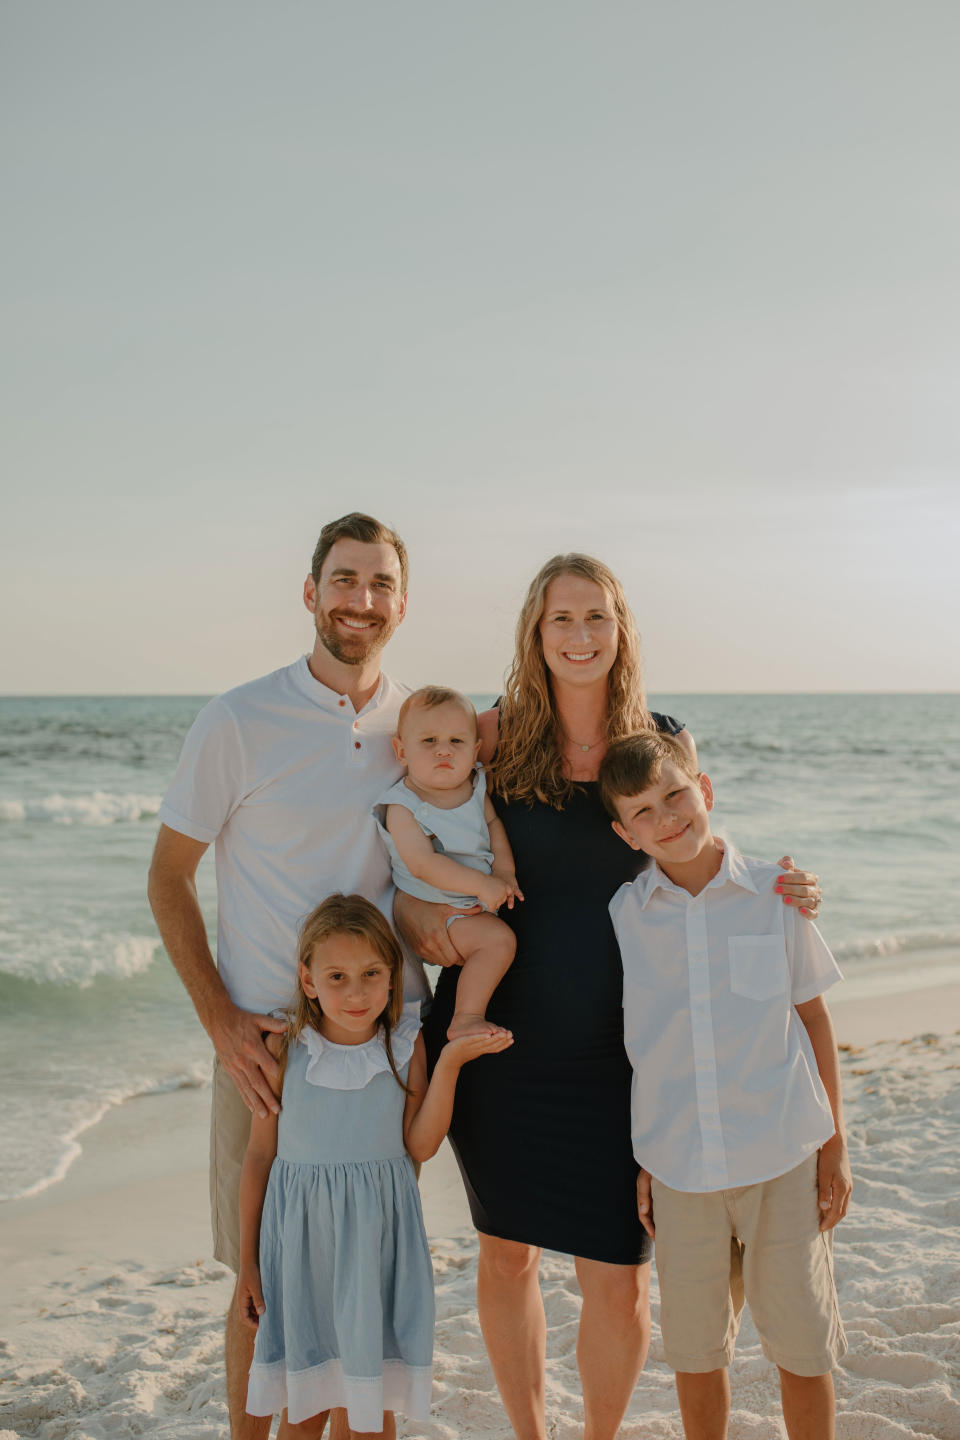 Jessica Grib experienced heart failure during her second pregnancy, and she had a tumor removed that likely contributed to it. After years with stable health, she felt comfortable to get pregnant again and has had no problems in her third and fourth pregnancies. (Courtesy Shore Shooters Beach Photography)